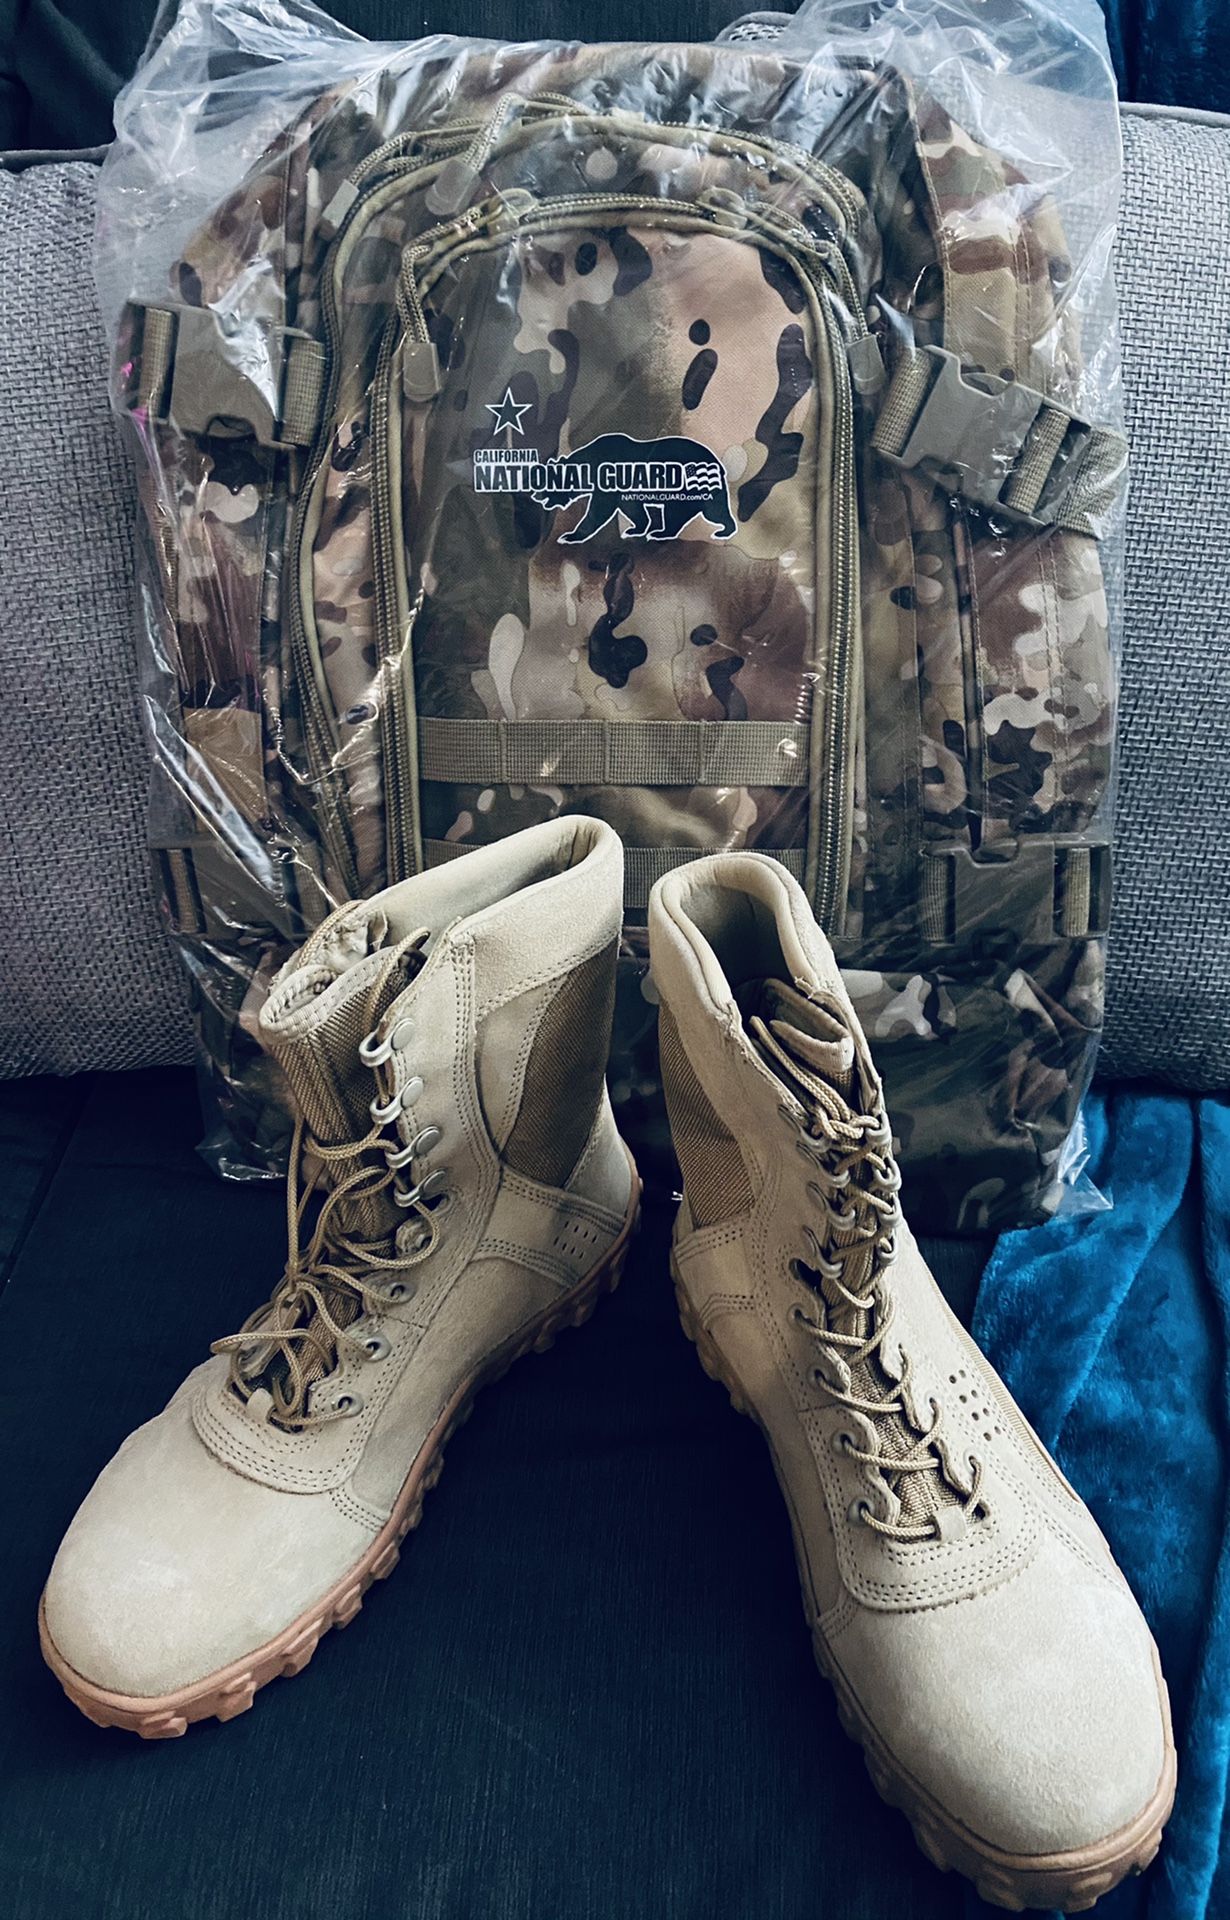 ARMY certified rocky combat boots size 9.5 and ARMY CalGuard backpack